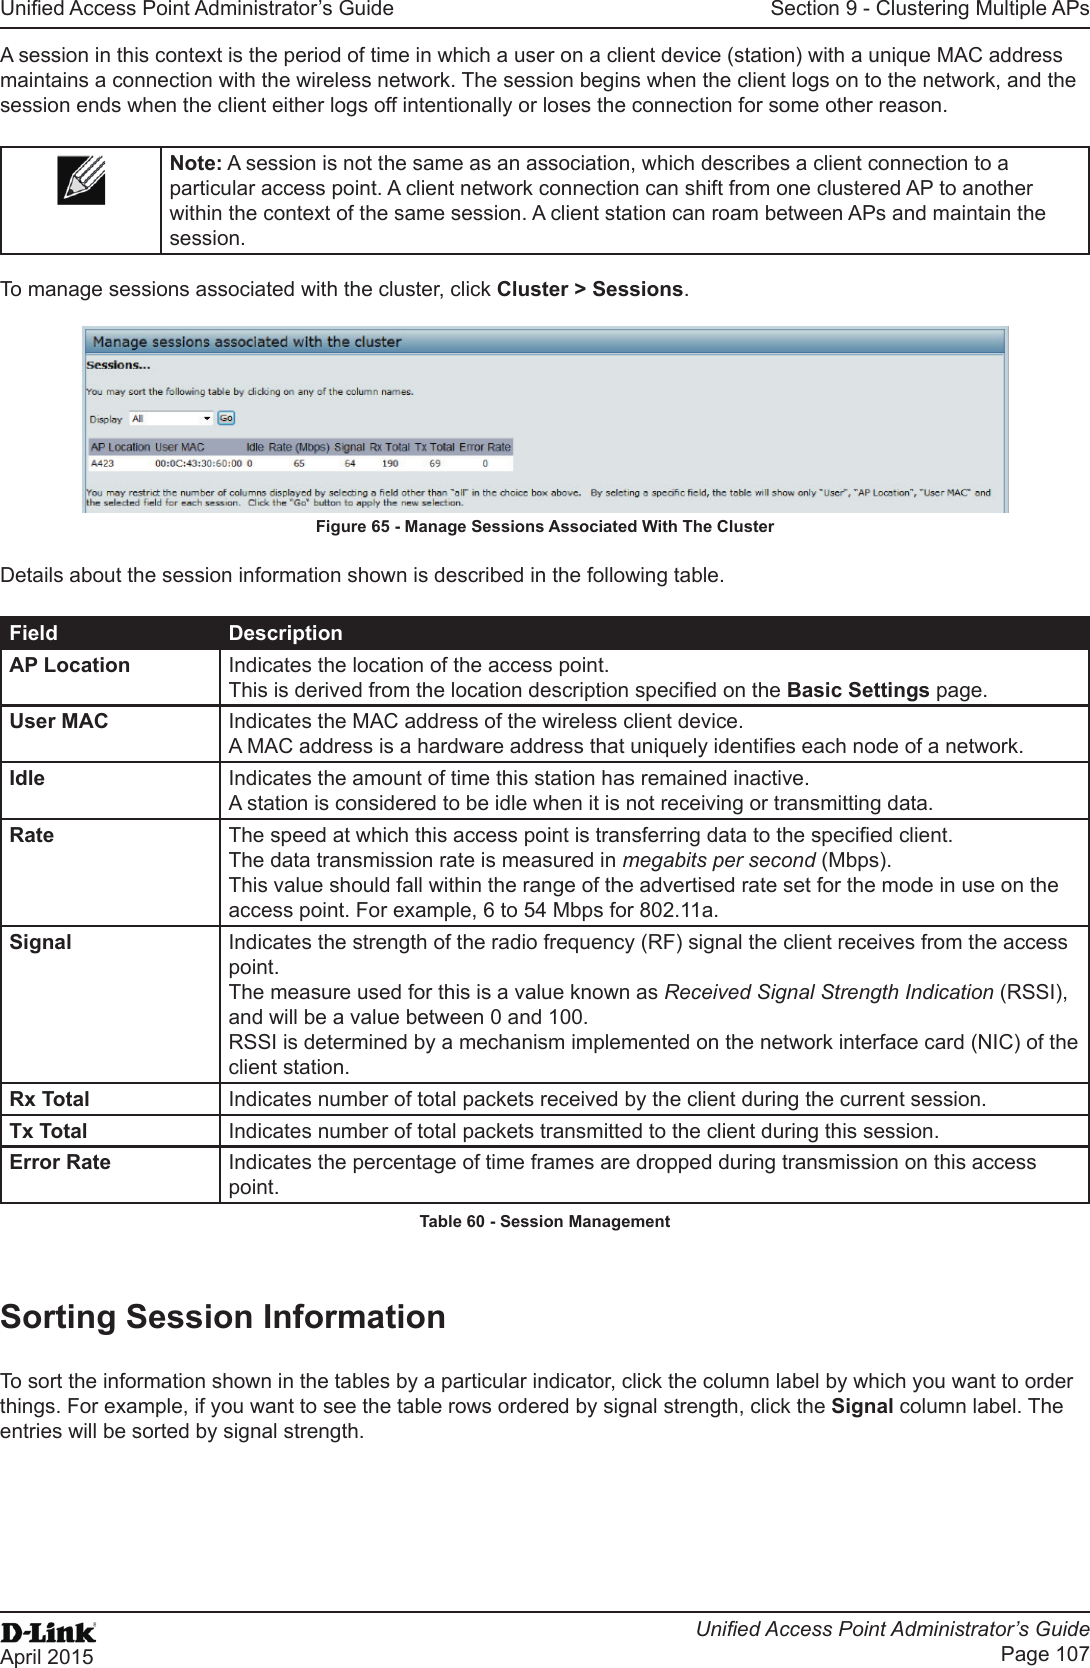 Unied Access Point Administrator’s GuideUnied Access Point Administrator’s GuidePage 107April 2015Section 9 - Clustering Multiple APsA session in this context is the period of time in which a user on a client device (station) with a unique MAC address maintains a connection with the wireless network. The session begins when the client logs on to the network, and the session ends when the client either logs off intentionally or loses the connection for some other reason.Note: A session is not the same as an association, which describes a client connection to a particular access point. A client network connection can shift from one clustered AP to another within the context of the same session. A client station can roam between APs and maintain the session.To manage sessions associated with the cluster, click Cluster &gt; Sessions.Figure 65 - Manage Sessions Associated With The ClusterDetails about the session information shown is described in the following table.Field DescriptionAP Location Indicates the location of the access point.This is derived from the location description specied on the Basic Settings page.User MAC Indicates the MAC address of the wireless client device.A MAC address is a hardware address that uniquely identies each node of a network.Idle Indicates the amount of time this station has remained inactive.A station is considered to be idle when it is not receiving or transmitting data.Rate The speed at which this access point is transferring data to the specied client.The data transmission rate is measured in megabits per second (Mbps).This value should fall within the range of the advertised rate set for the mode in use on the access point. For example, 6 to 54 Mbps for 802.11a.Signal Indicates the strength of the radio frequency (RF) signal the client receives from the access point.The measure used for this is a value known as Received Signal Strength Indication (RSSI), and will be a value between 0 and 100.RSSI is determined by a mechanism implemented on the network interface card (NIC) of the client station.Rx Total Indicates number of total packets received by the client during the current session.Tx Total Indicates number of total packets transmitted to the client during this session.Error Rate Indicates the percentage of time frames are dropped during transmission on this access point.Table 60 - Session ManagementSorting Session InformationTo sort the information shown in the tables by a particular indicator, click the column label by which you want to order things. For example, if you want to see the table rows ordered by signal strength, click the Signal column label. The entries will be sorted by signal strength.